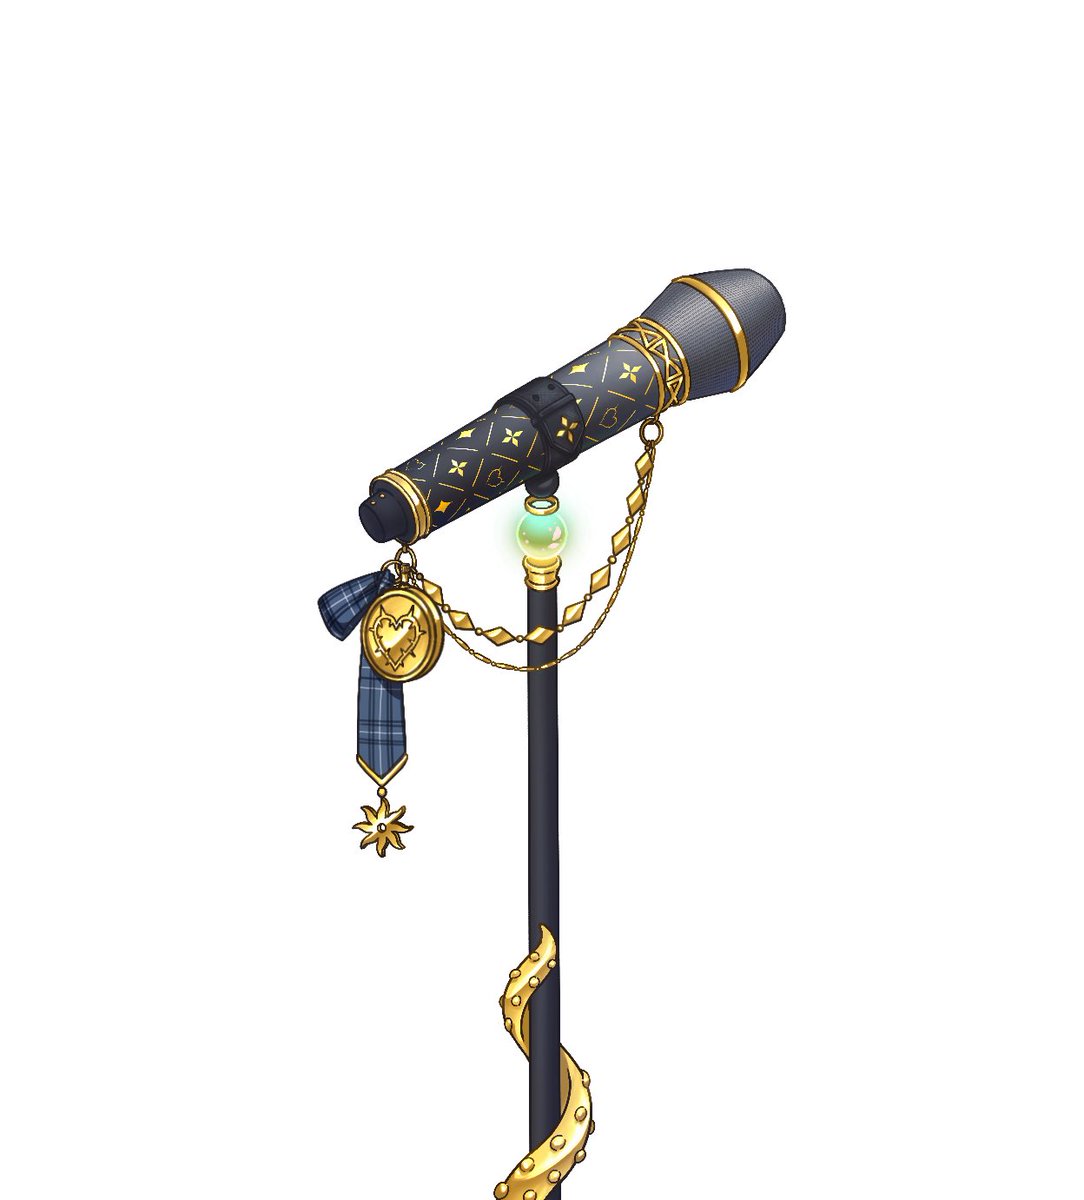 #Ikenography #Graphike
I just wanna design new mic for Ike’s New outfit🖋
Please use this whenever ike u want, even if not a karaoke stream

Download link>> drive.google.com/drive/folders/…